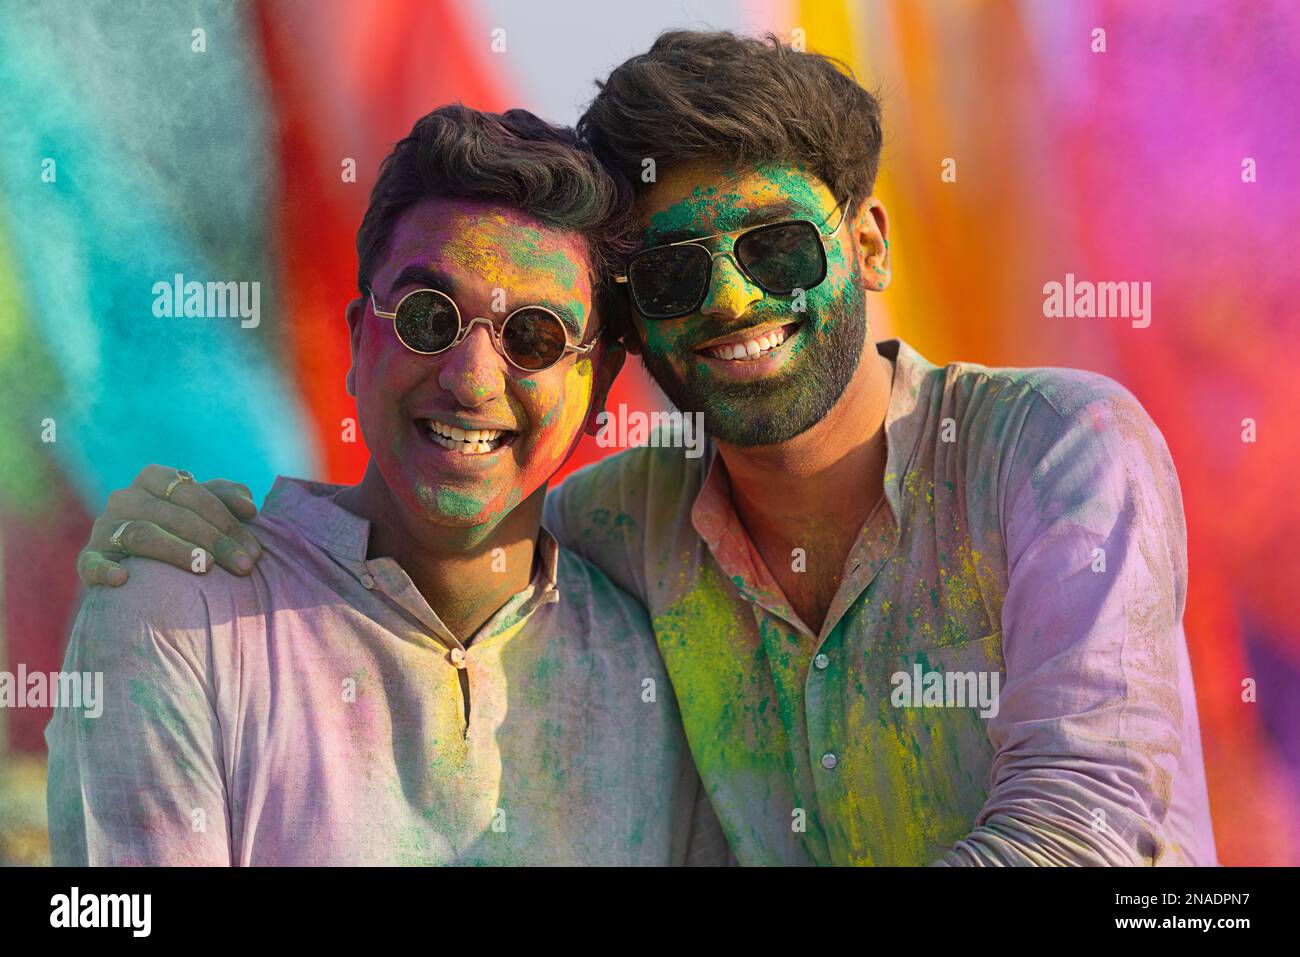 close-up portrait of smiling young men with colourful face and sunglass on holi Stock Photo